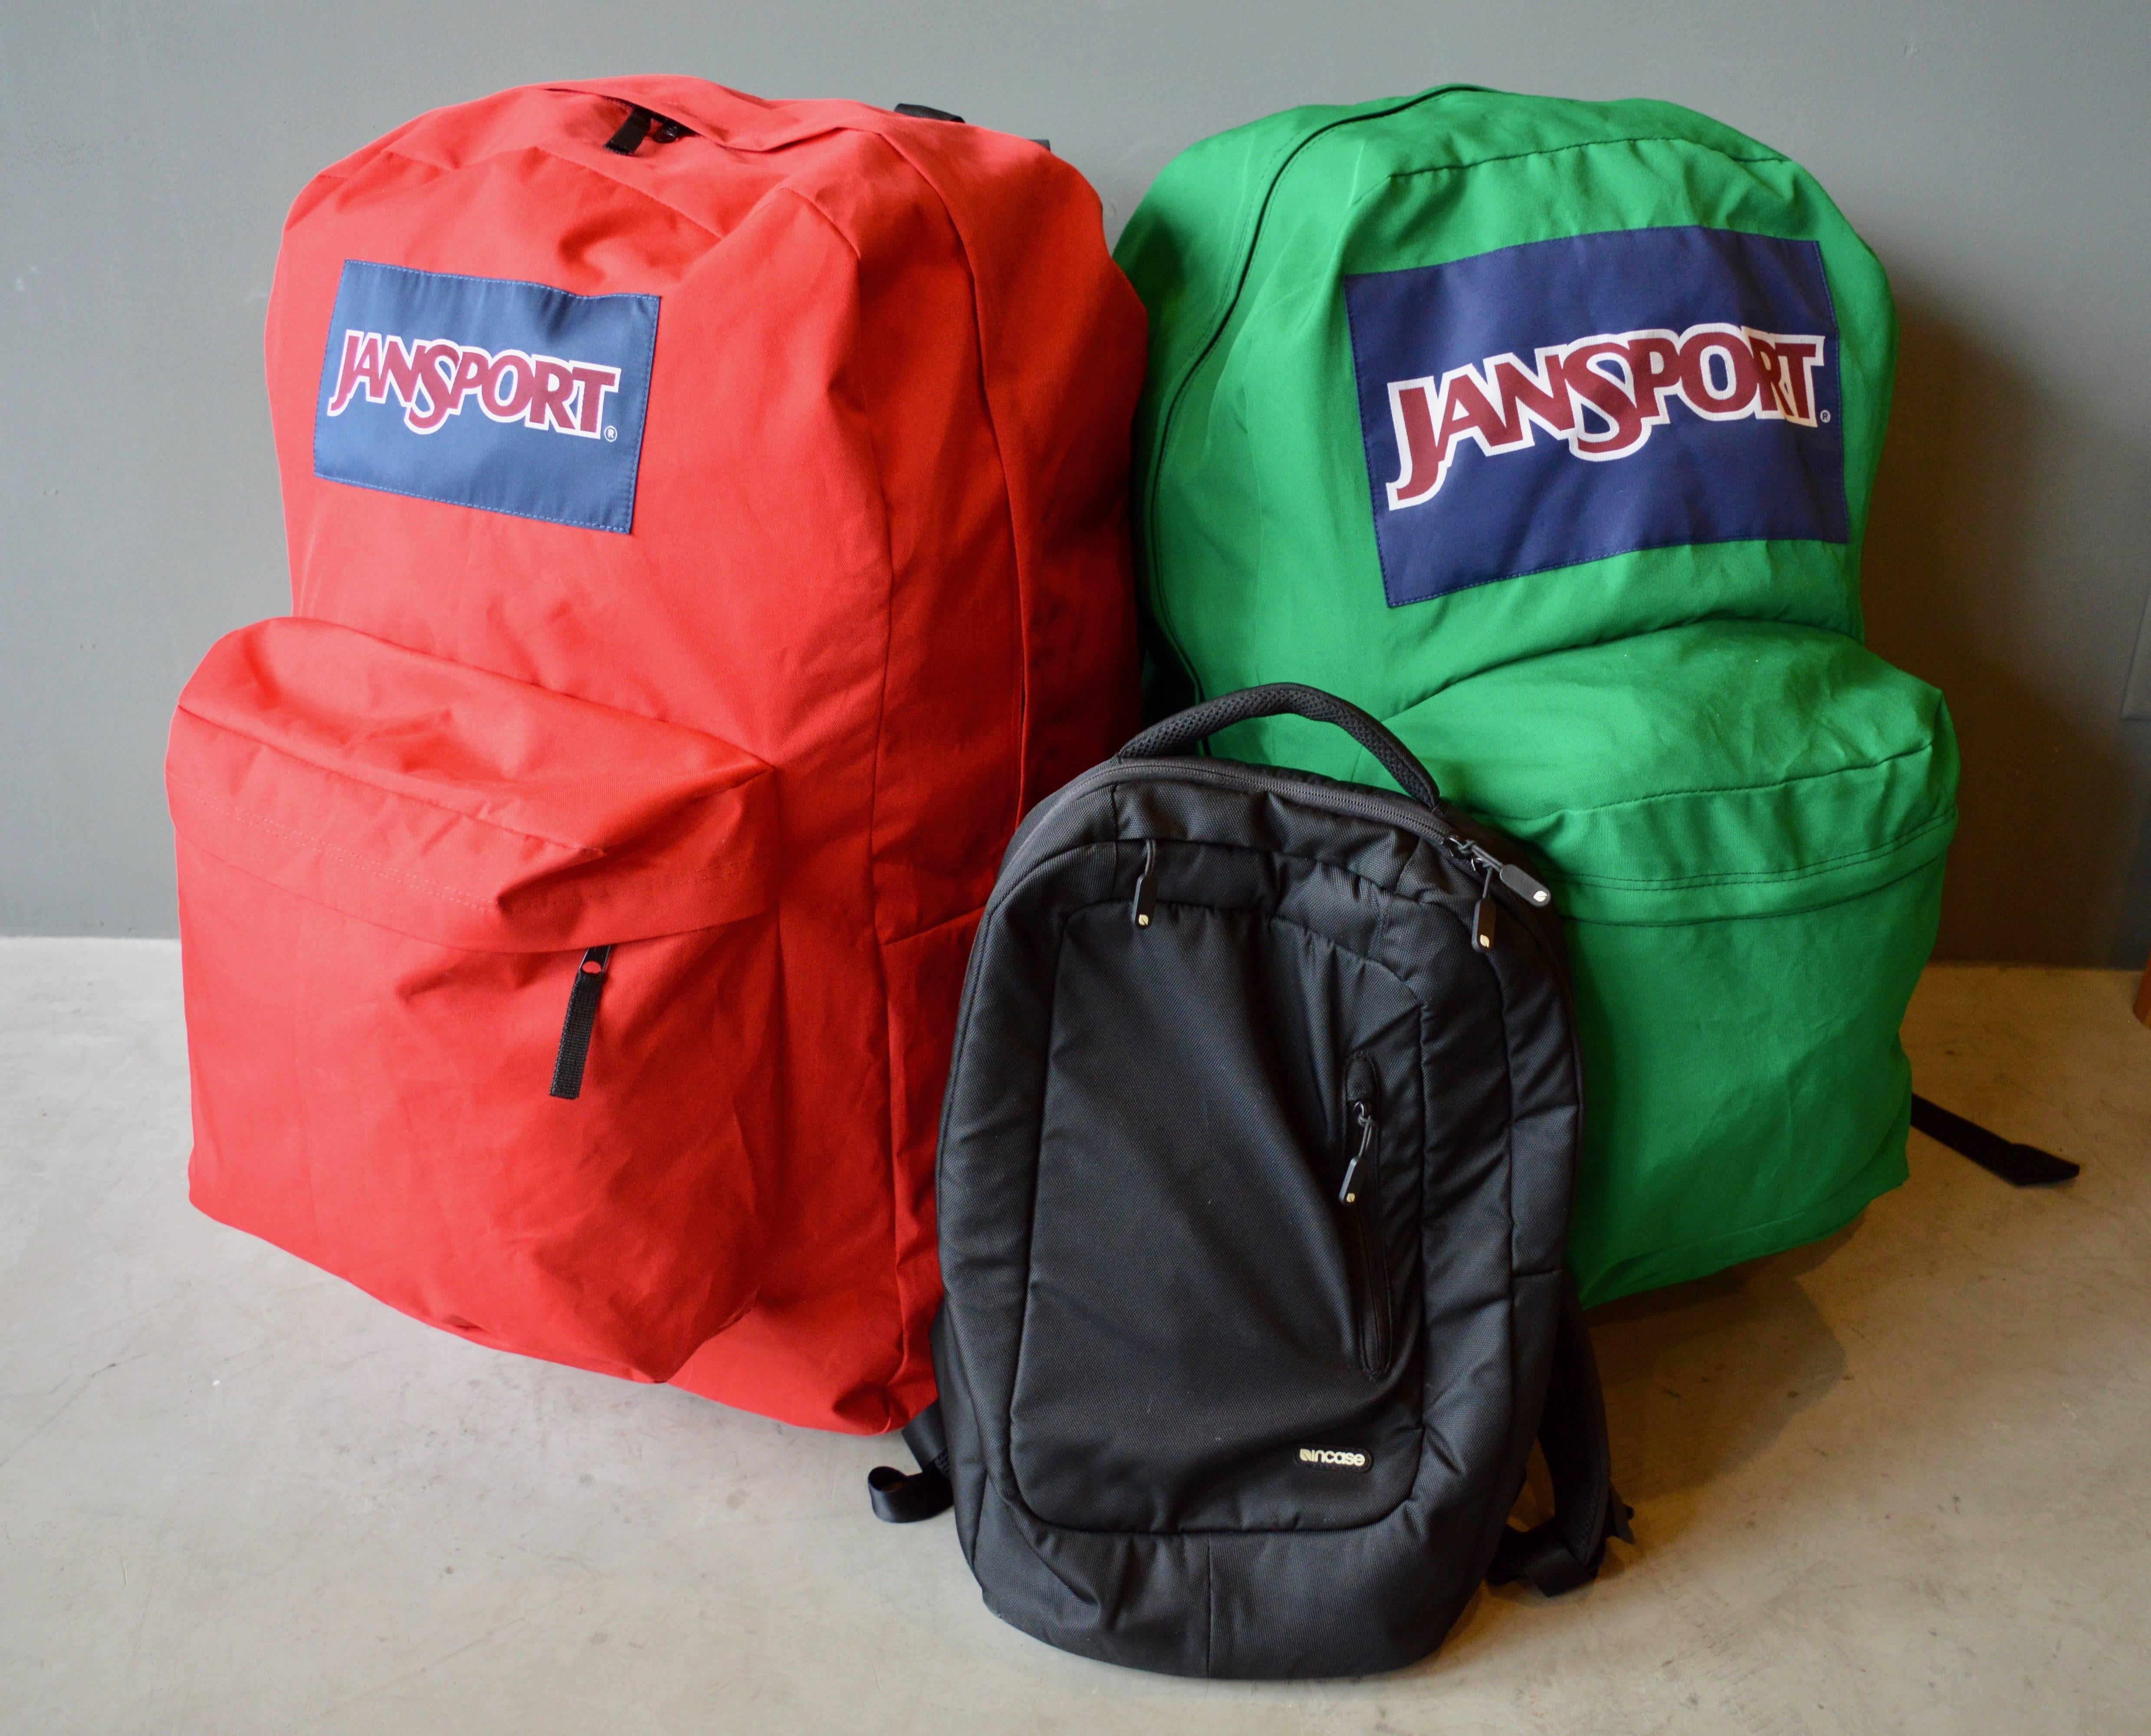 Massive oversized Jansport backpacks. One red. One green. Over 2.5 feet tall. 400% larger than a normal backpack. Cool advertising piece. Great object for a kids room. Priced individually.